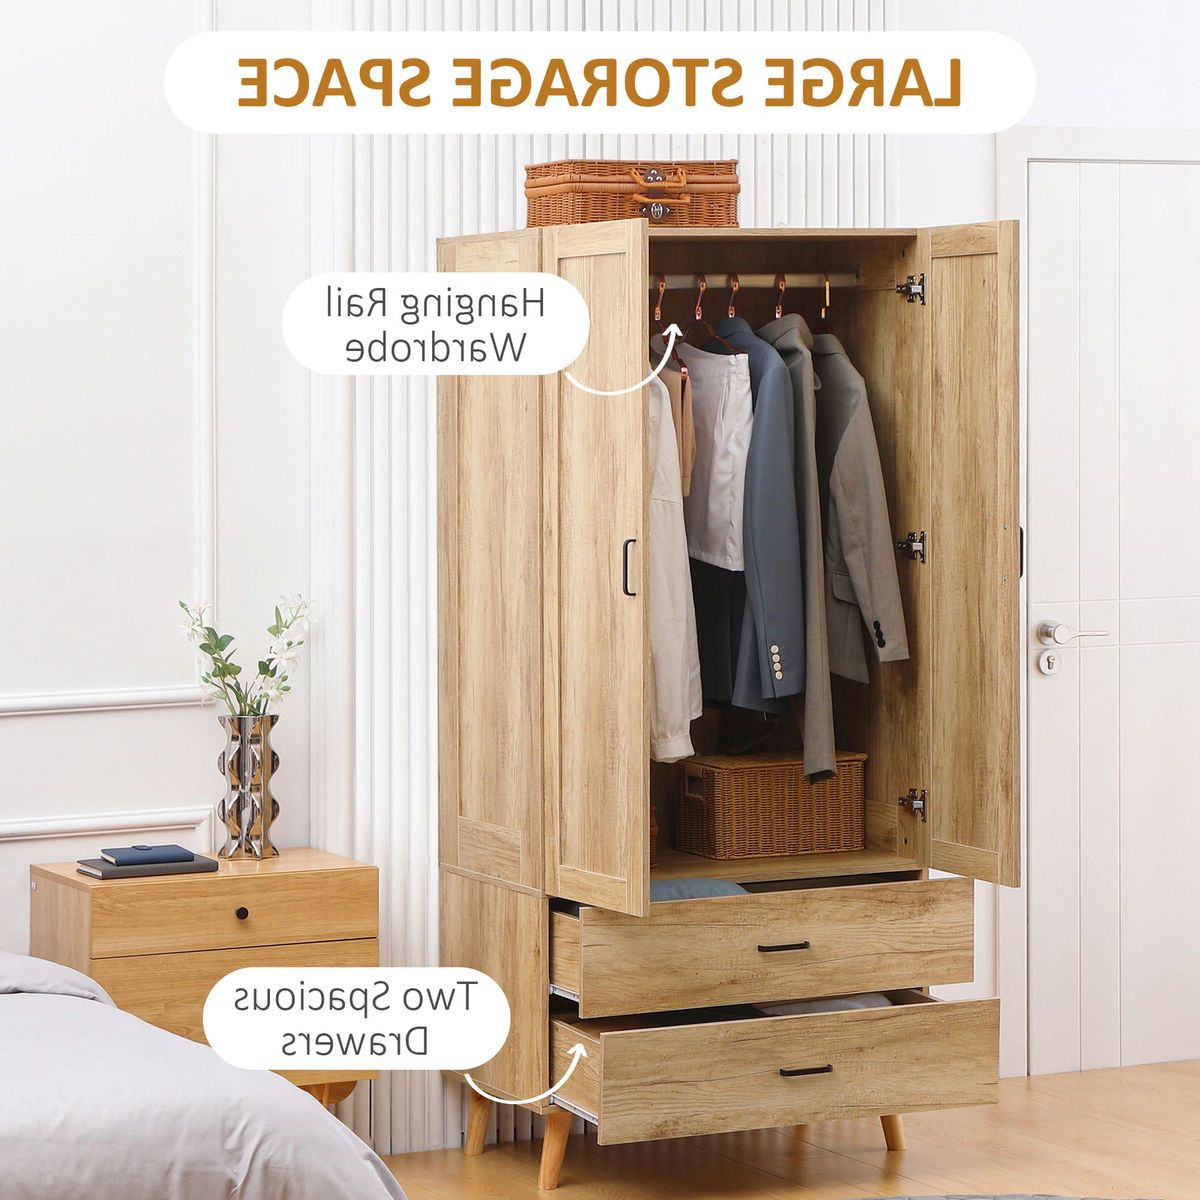 Wooden Wardrobe Double Door Closet Hanging Rail Clothing Storage Organiser  Shelf | Ebay In Wardrobes With Double Hanging Rail (Gallery 9 of 20)